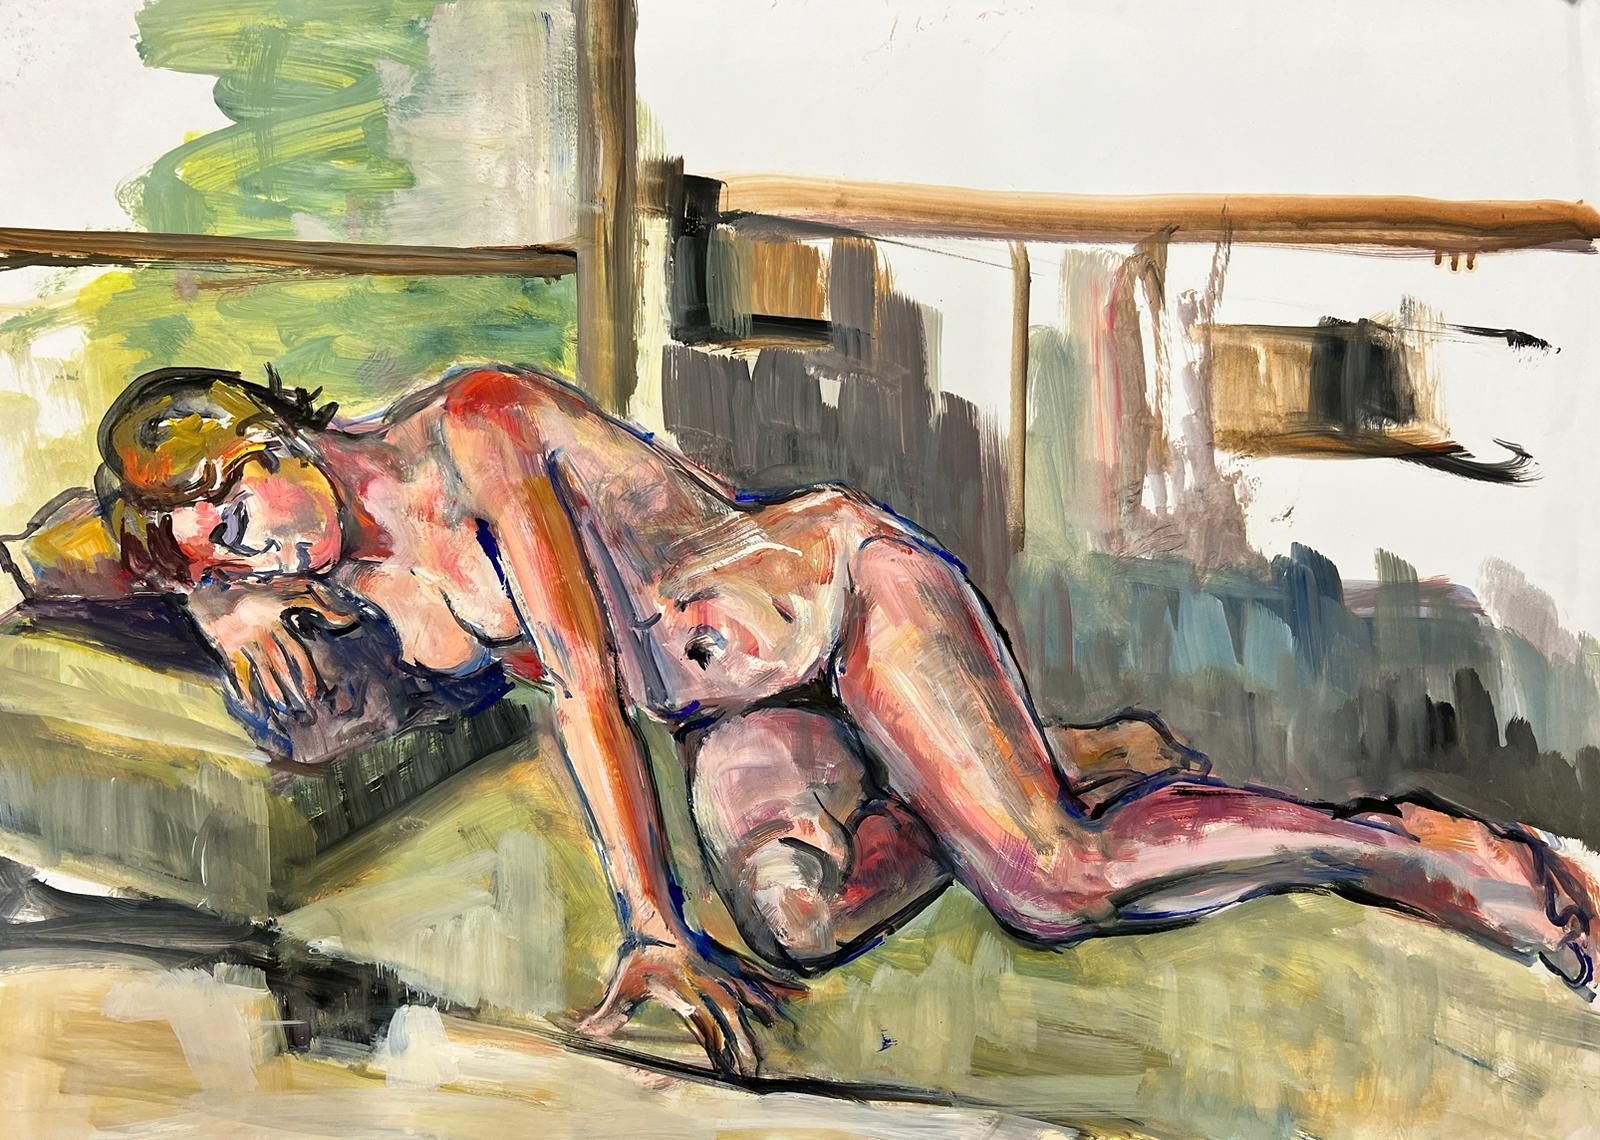 The Artists Model
Portrait of a Nude Lady reclining
French School, circa 1970's
oil painting on card, unframed
size: 18 x 25.5 inches
condition: overall very good, a very few light markings to the surface but nothing detrimental to the appeal and